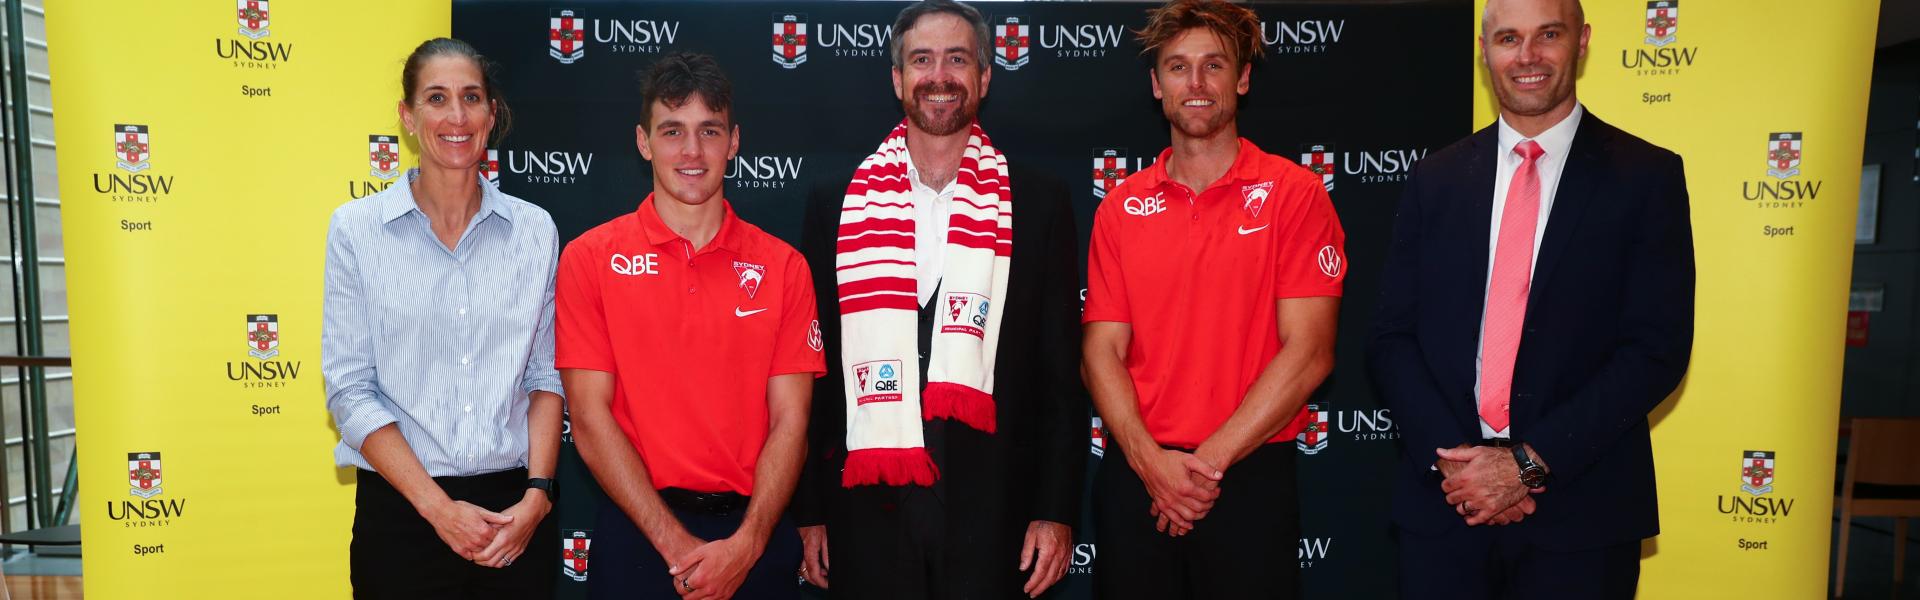 Sydney Swans players and administrators at UNSW to announce the partnership between the two organisations